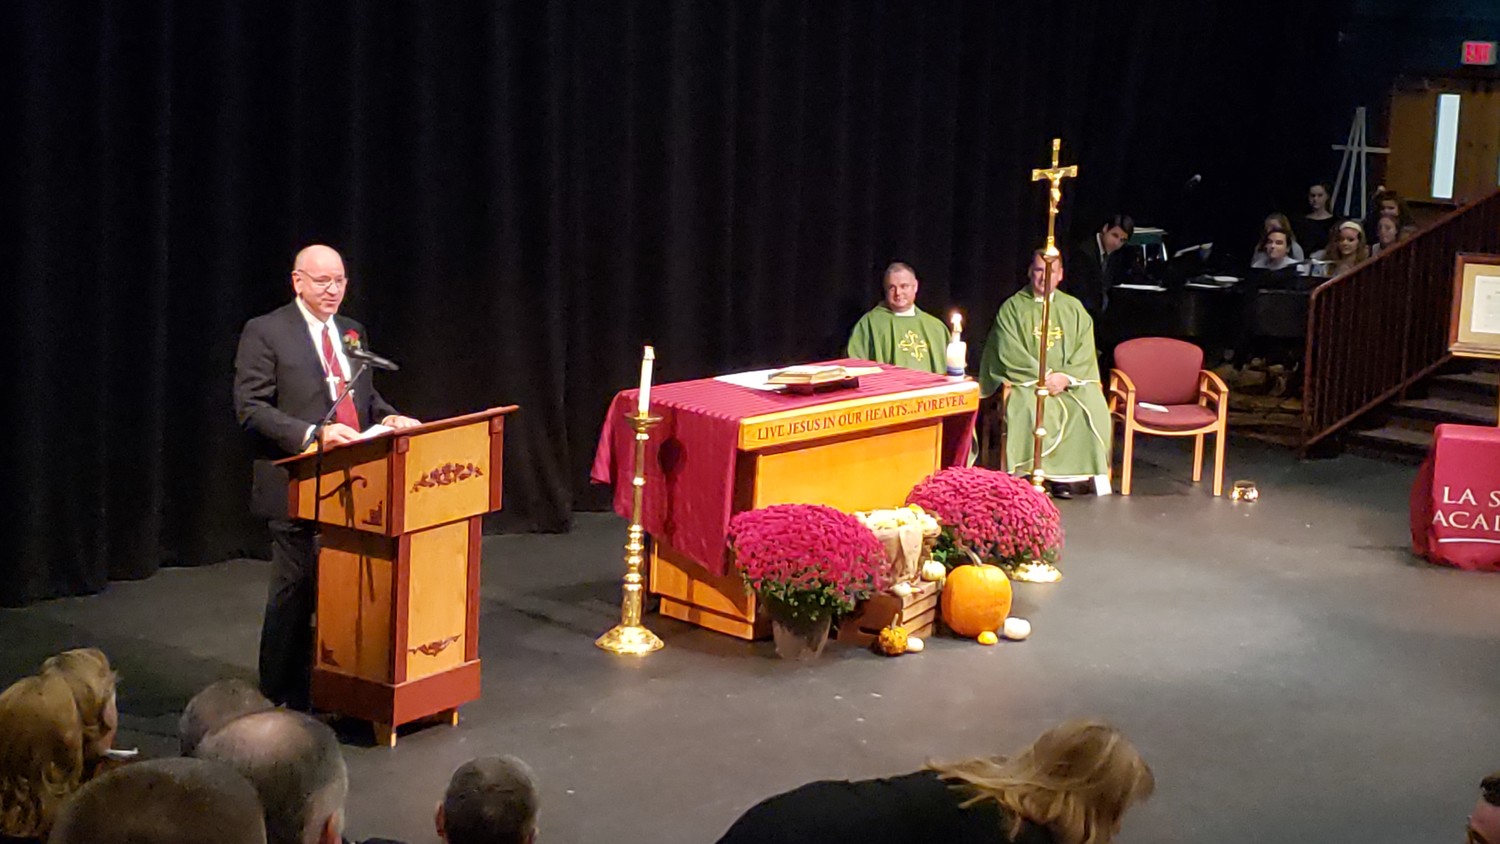 On Saturday, October 13, La Salle Academy honored Donald J. Kavanagh, A.F.S.C., Principal, on the occasion of his being named an Affiliated Member of the Brothers of the Christian Schools, the highest honor a lay person can receive from the Institute.